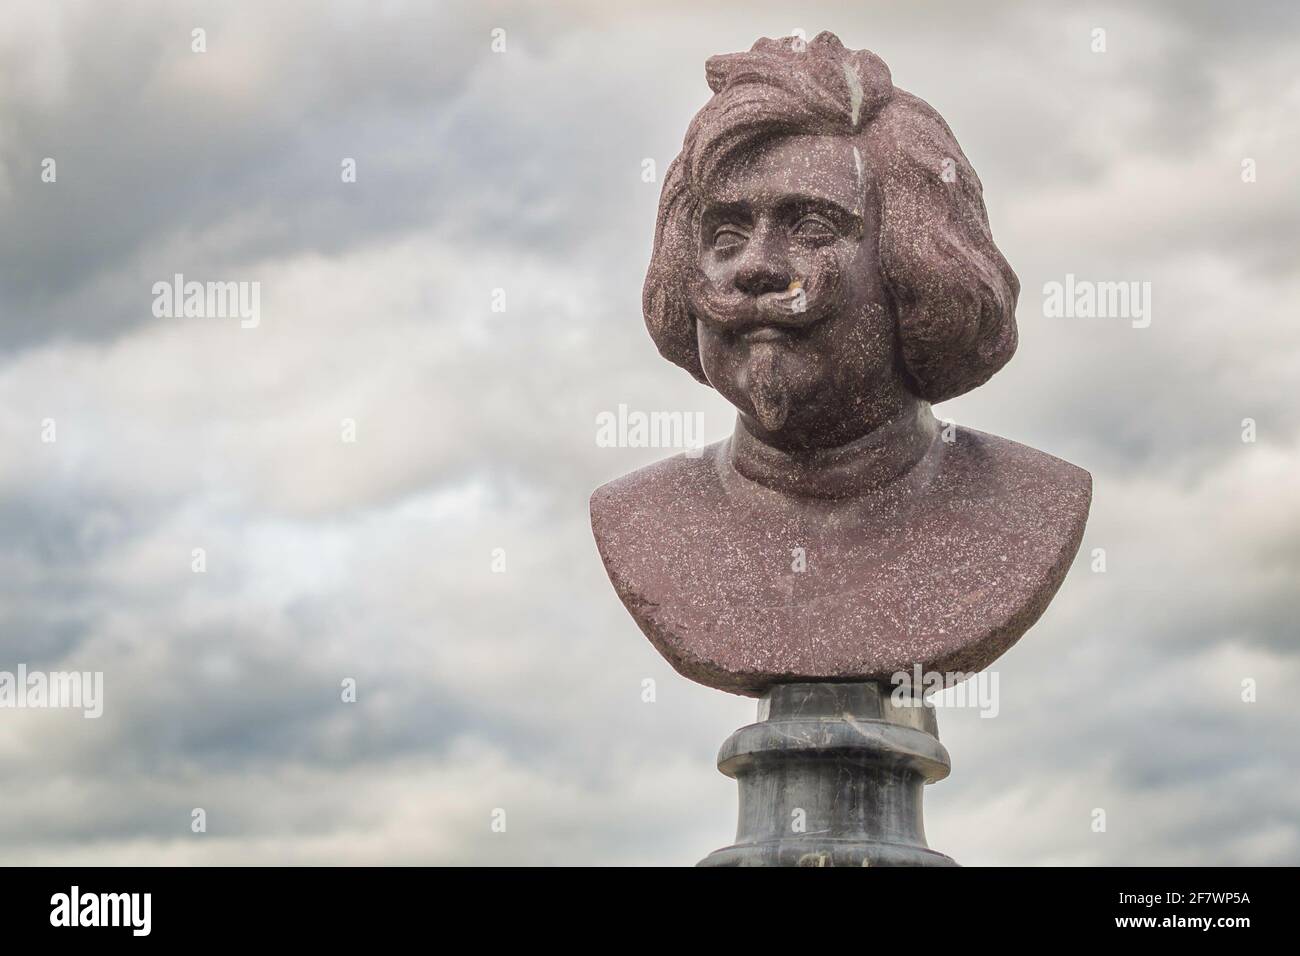 Closeup shot of a stone bust of a long-haired man with a mustache Stock Photo